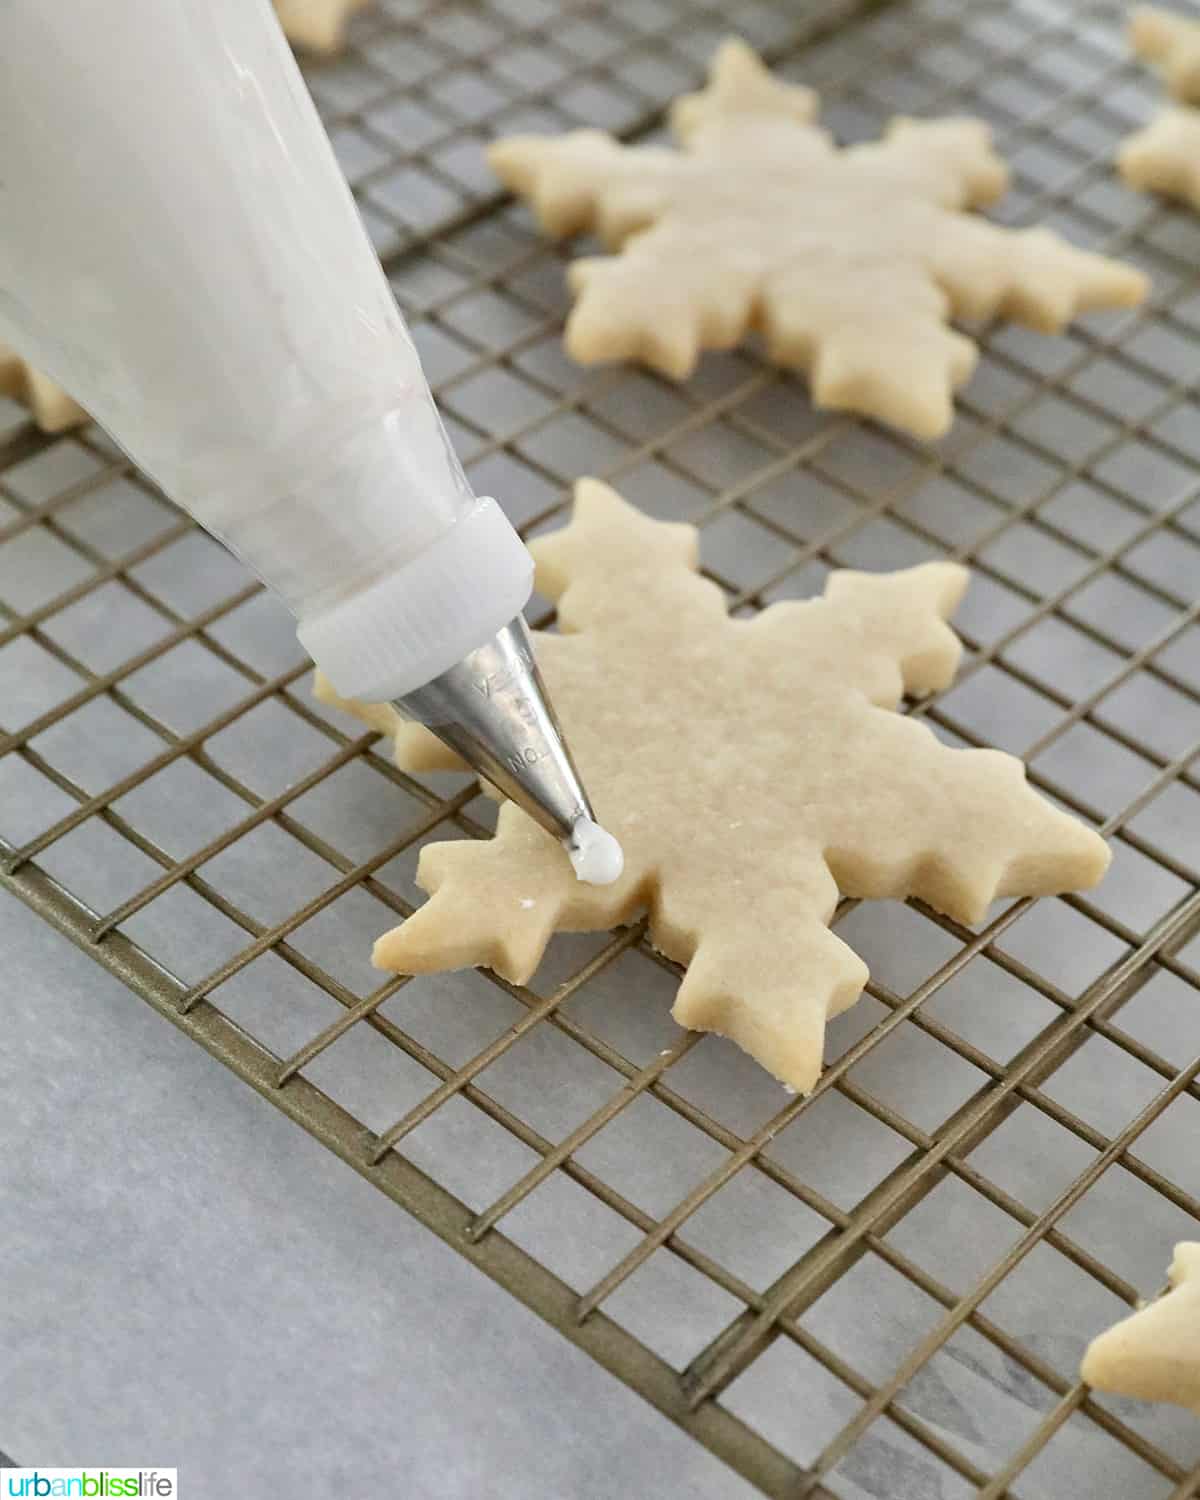 royal icing piping onto a snowflake sugar cookie on a wire rack.